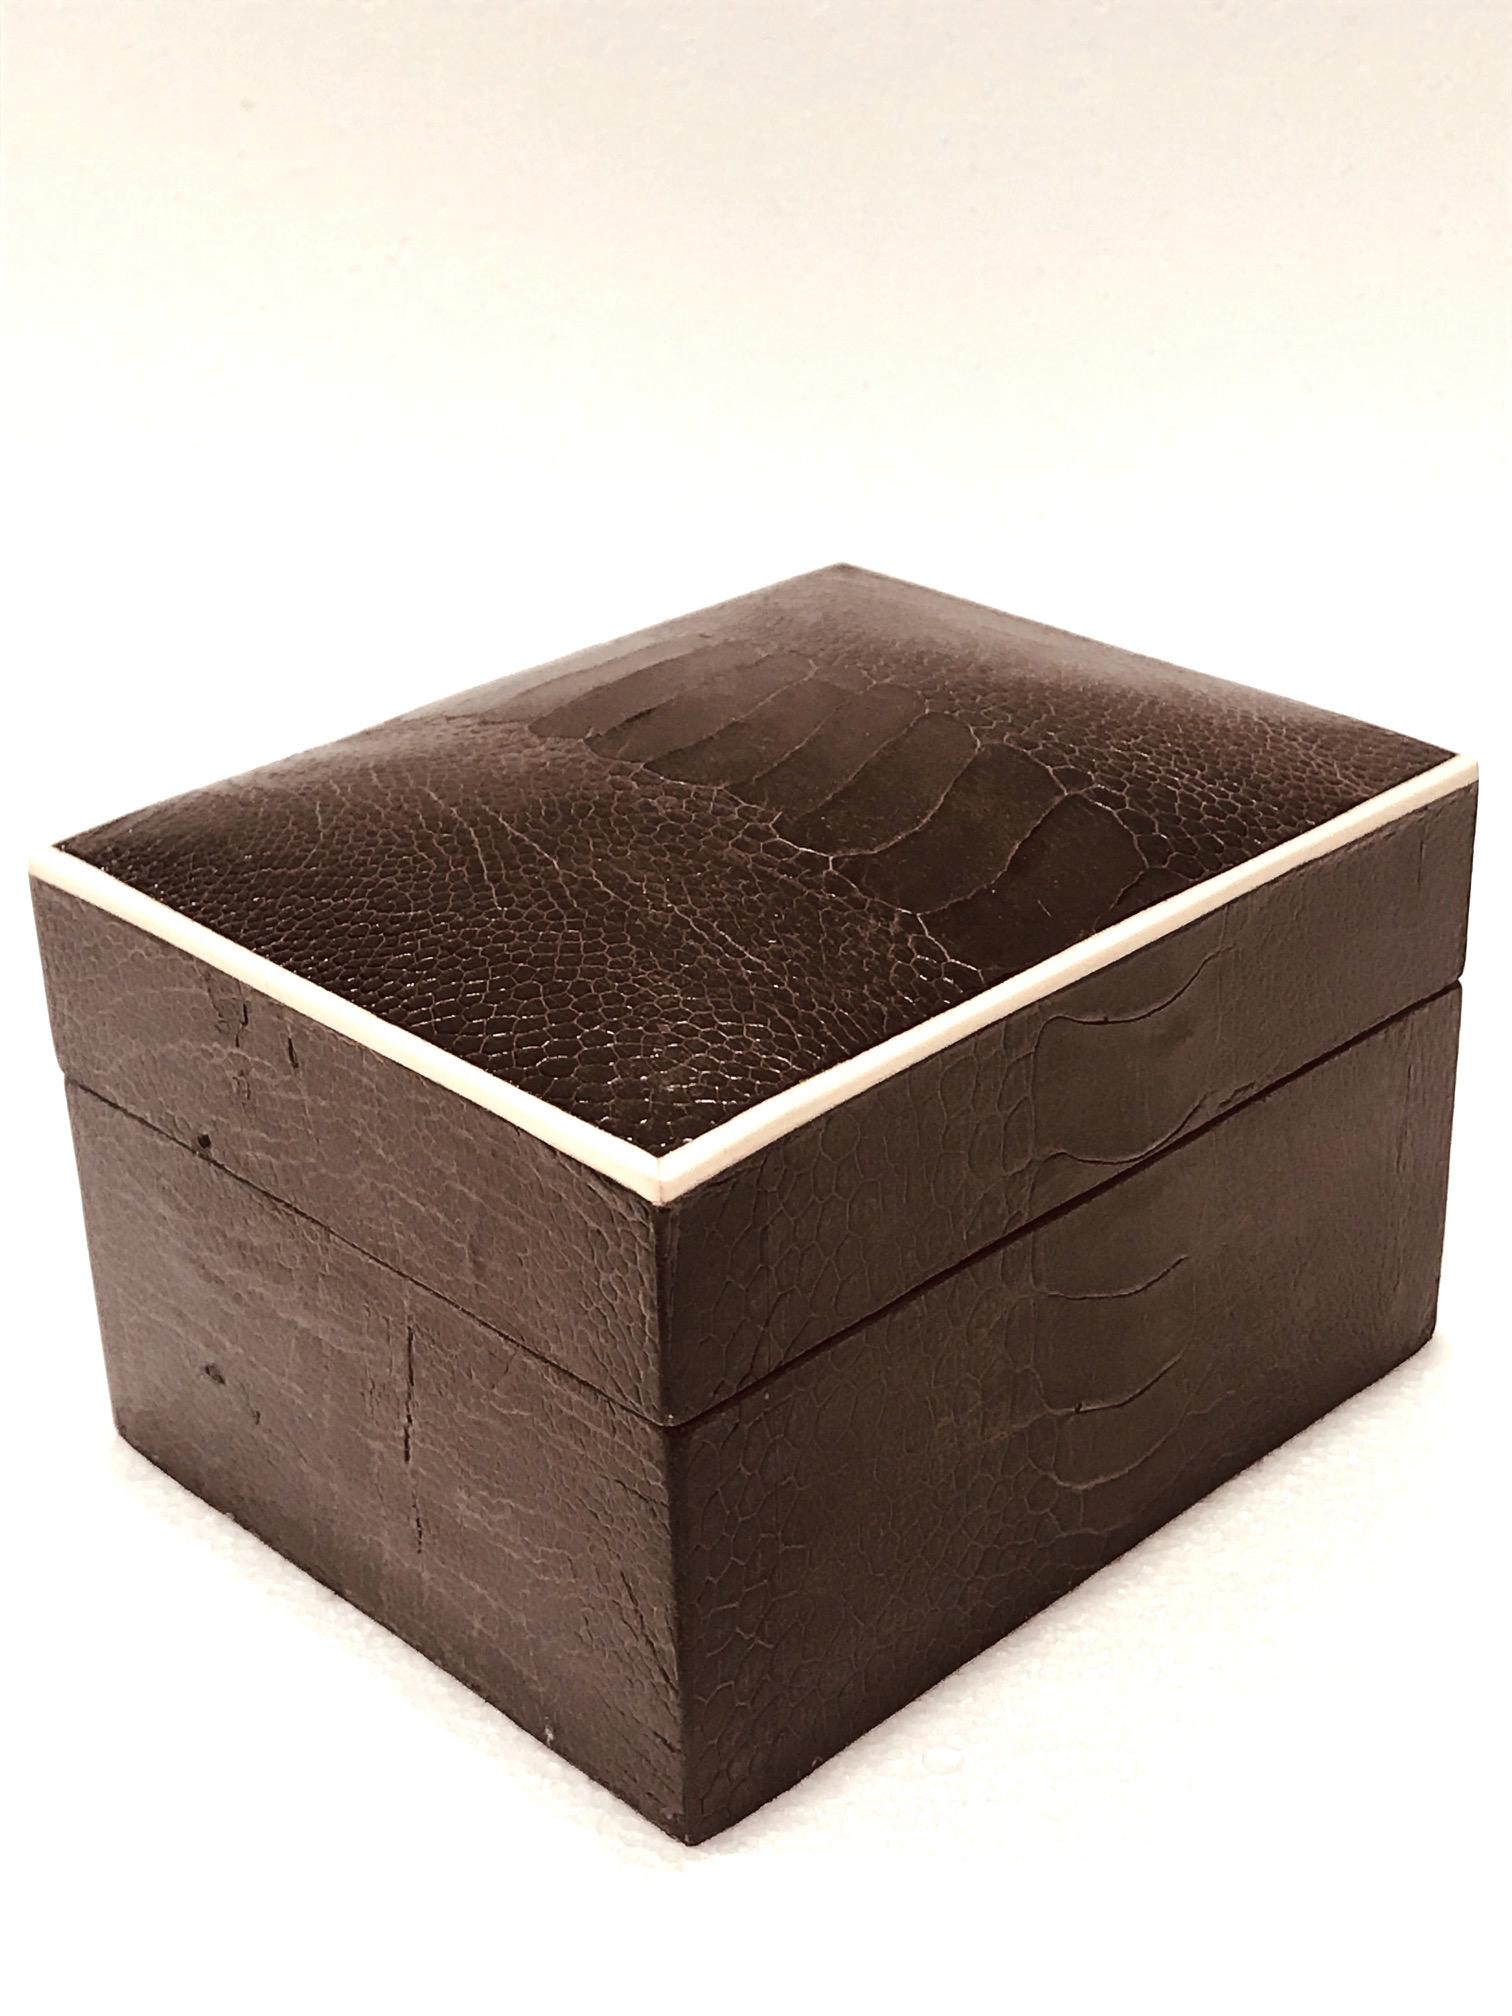 Organic modern decorative box wrapped in exotic ostrich leather with bone inlay detail. All handcrafted in hand-dyed brown espresso leather wrapped wood with a palmwood interior. Great desk or coffee table accessory. Signed R&Y Augousti on the